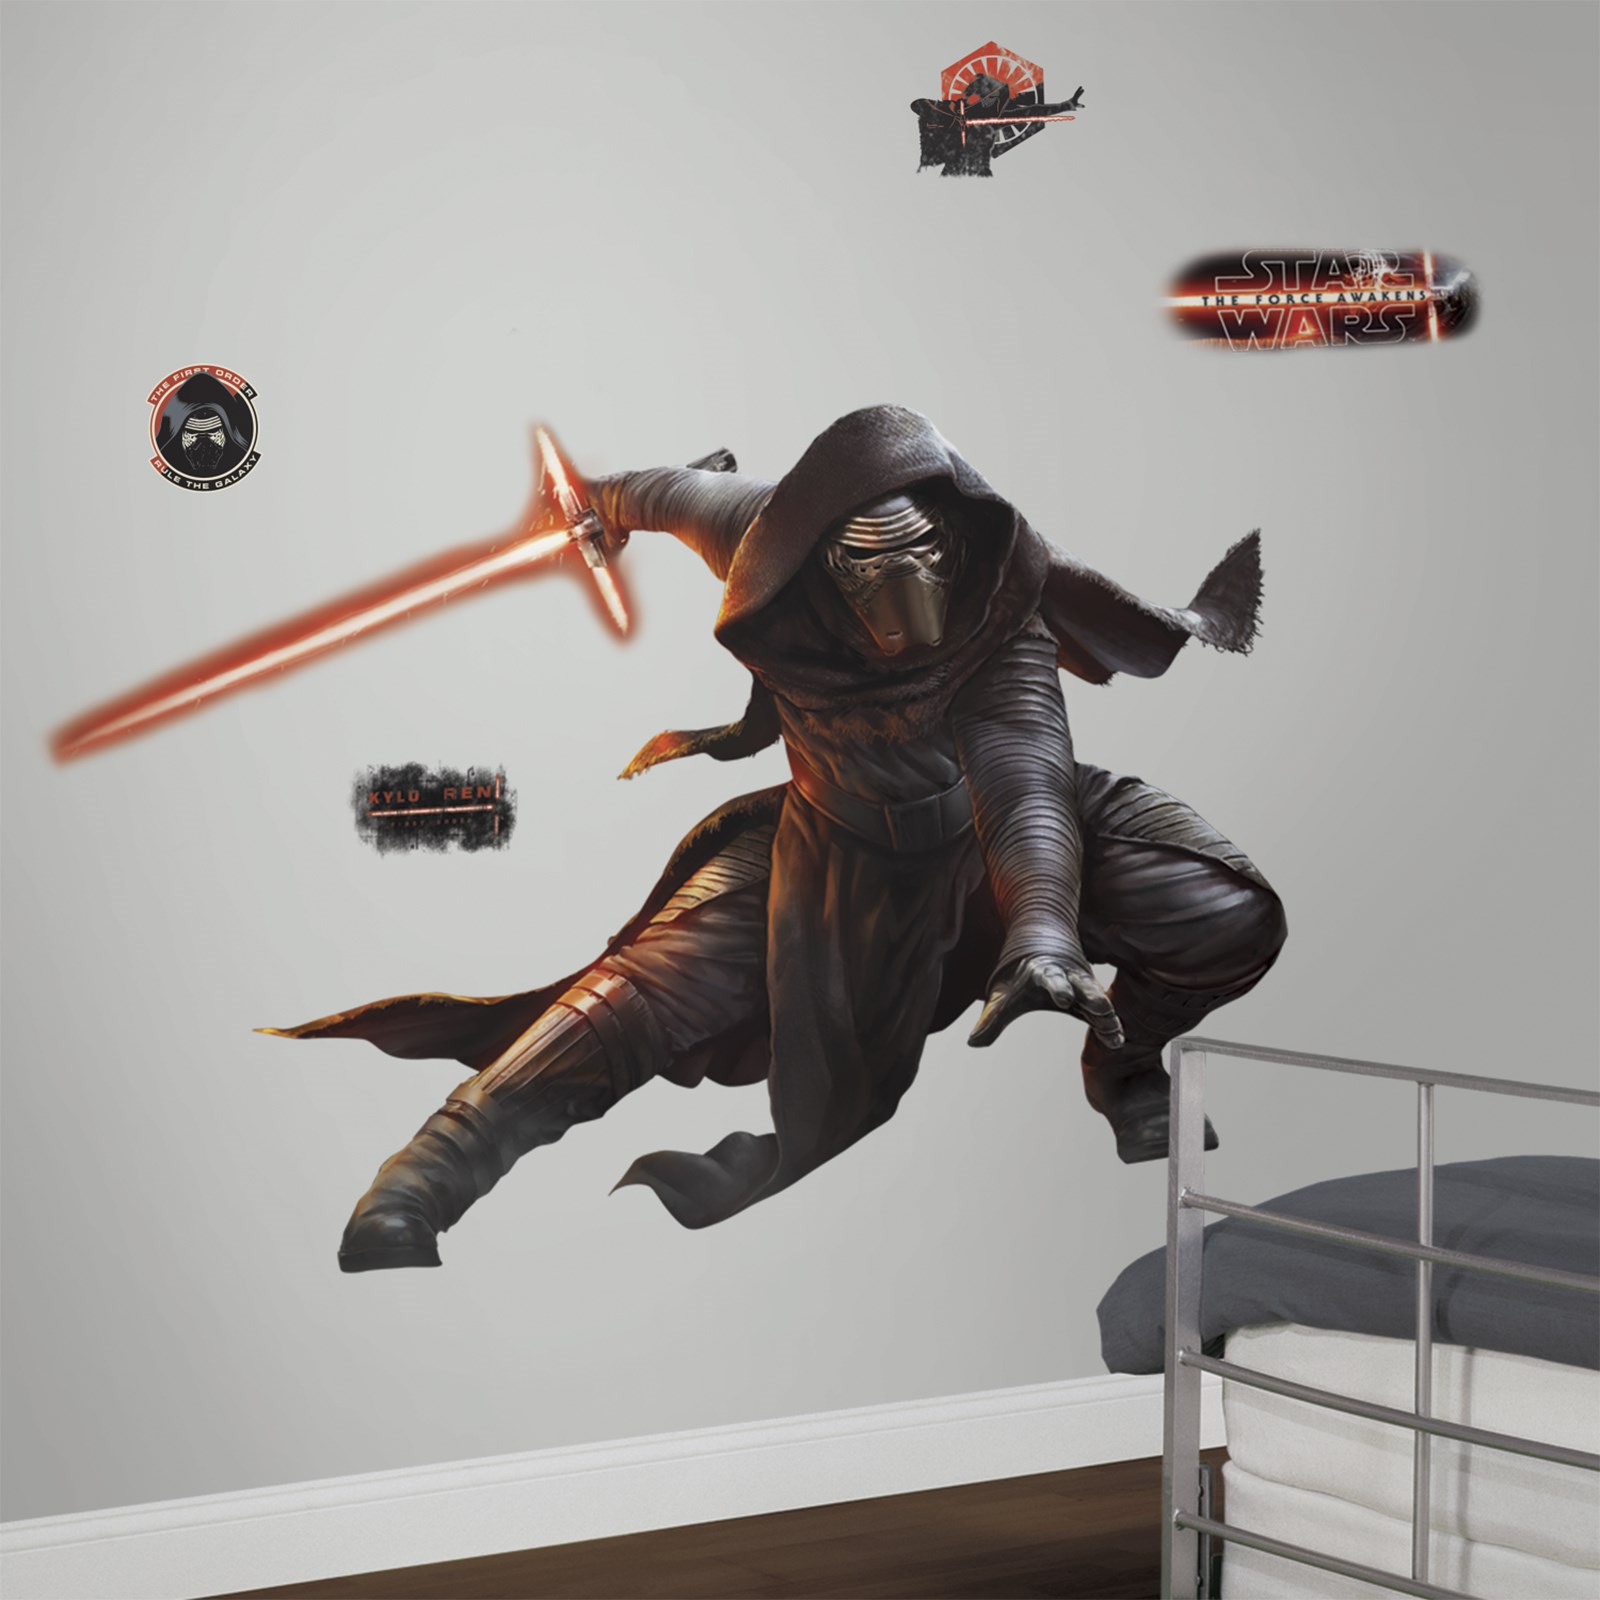 Star Wars 7 The Force Awakens Kylo Ren Glow in the Dark Giant Wall Decal